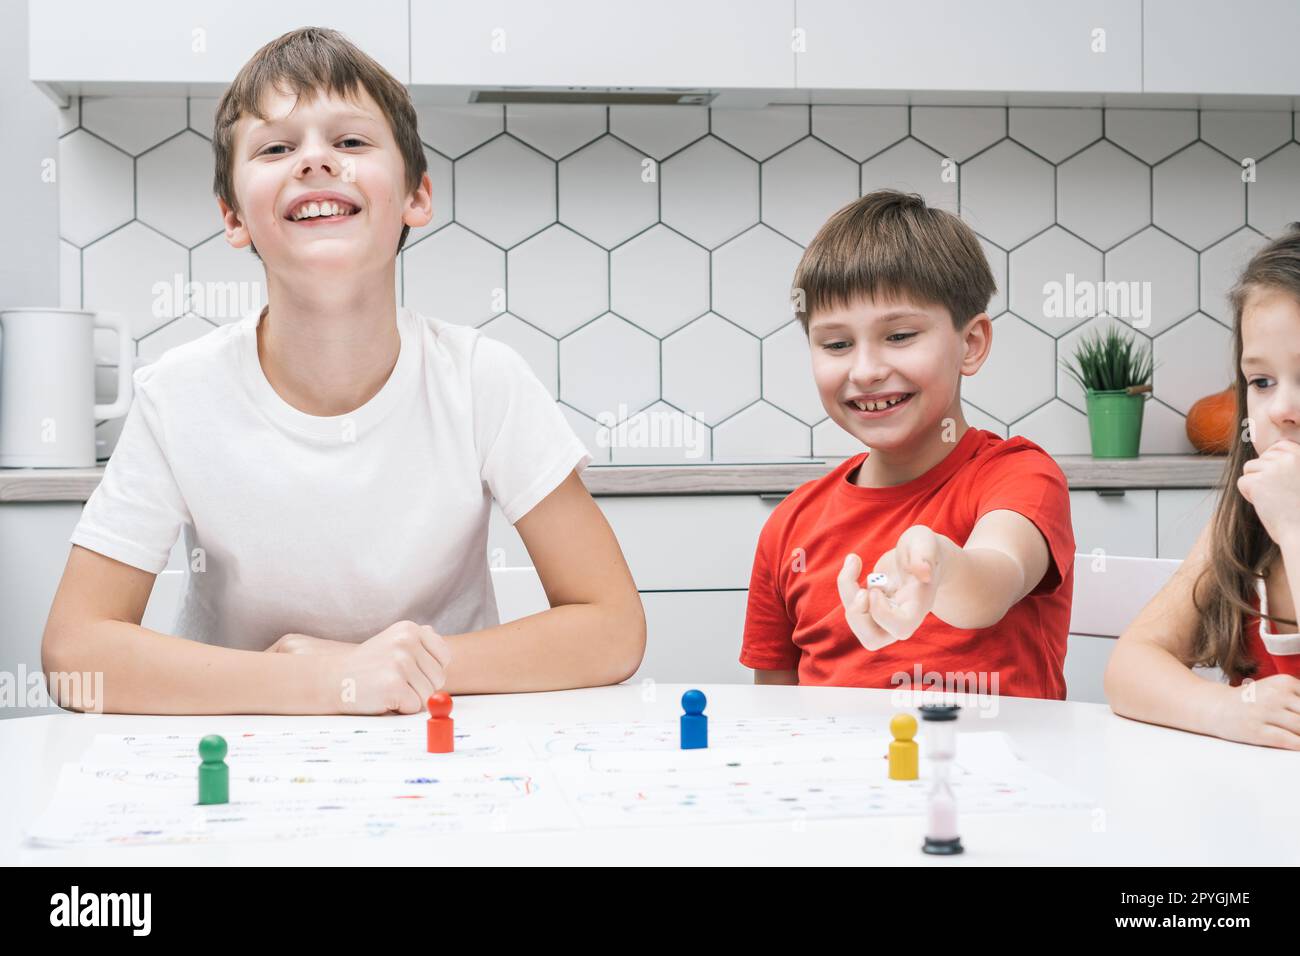 Smiling blissful children playing board game with pieces and dice with time limit. Family fun game. Educational strategy Stock Photo